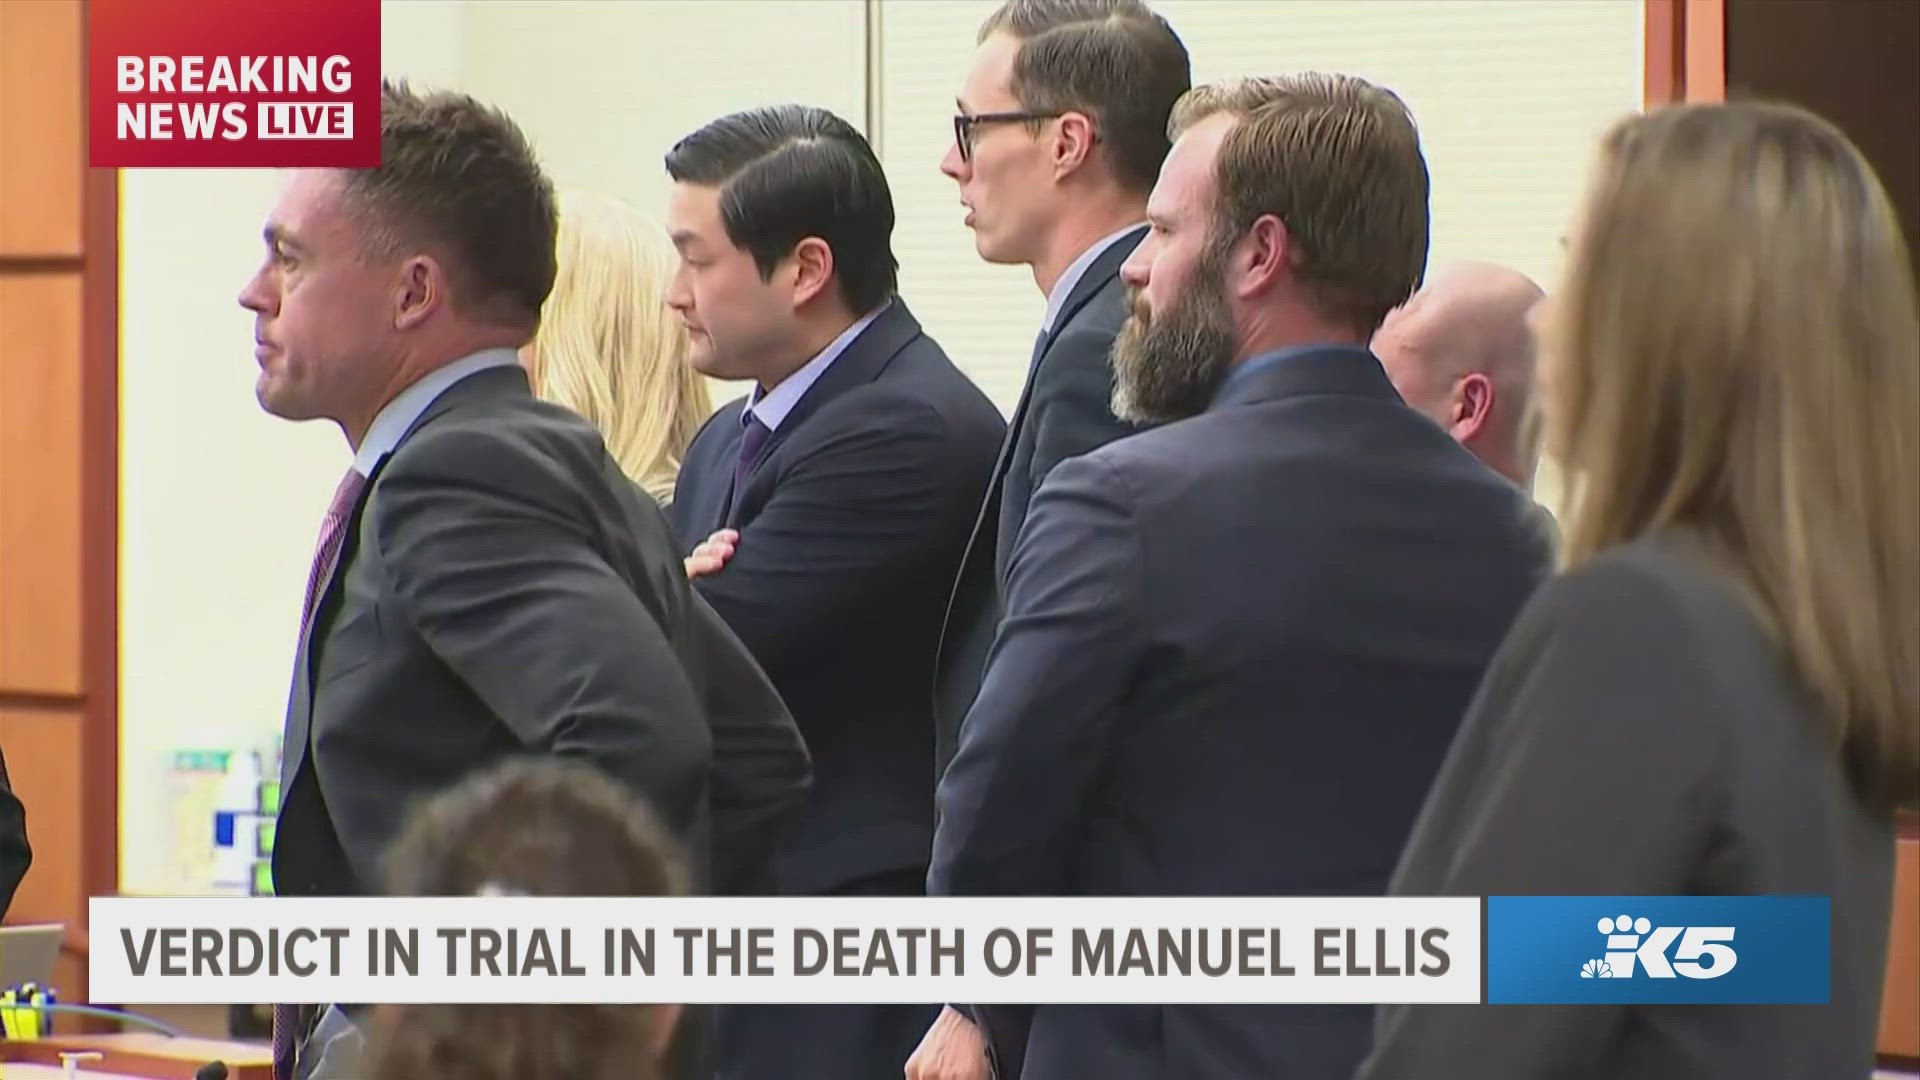 The jury reached a verdict on Thursday afternoon in the trial of three Tacoma police officers charged in the death of Manuel Ellis.